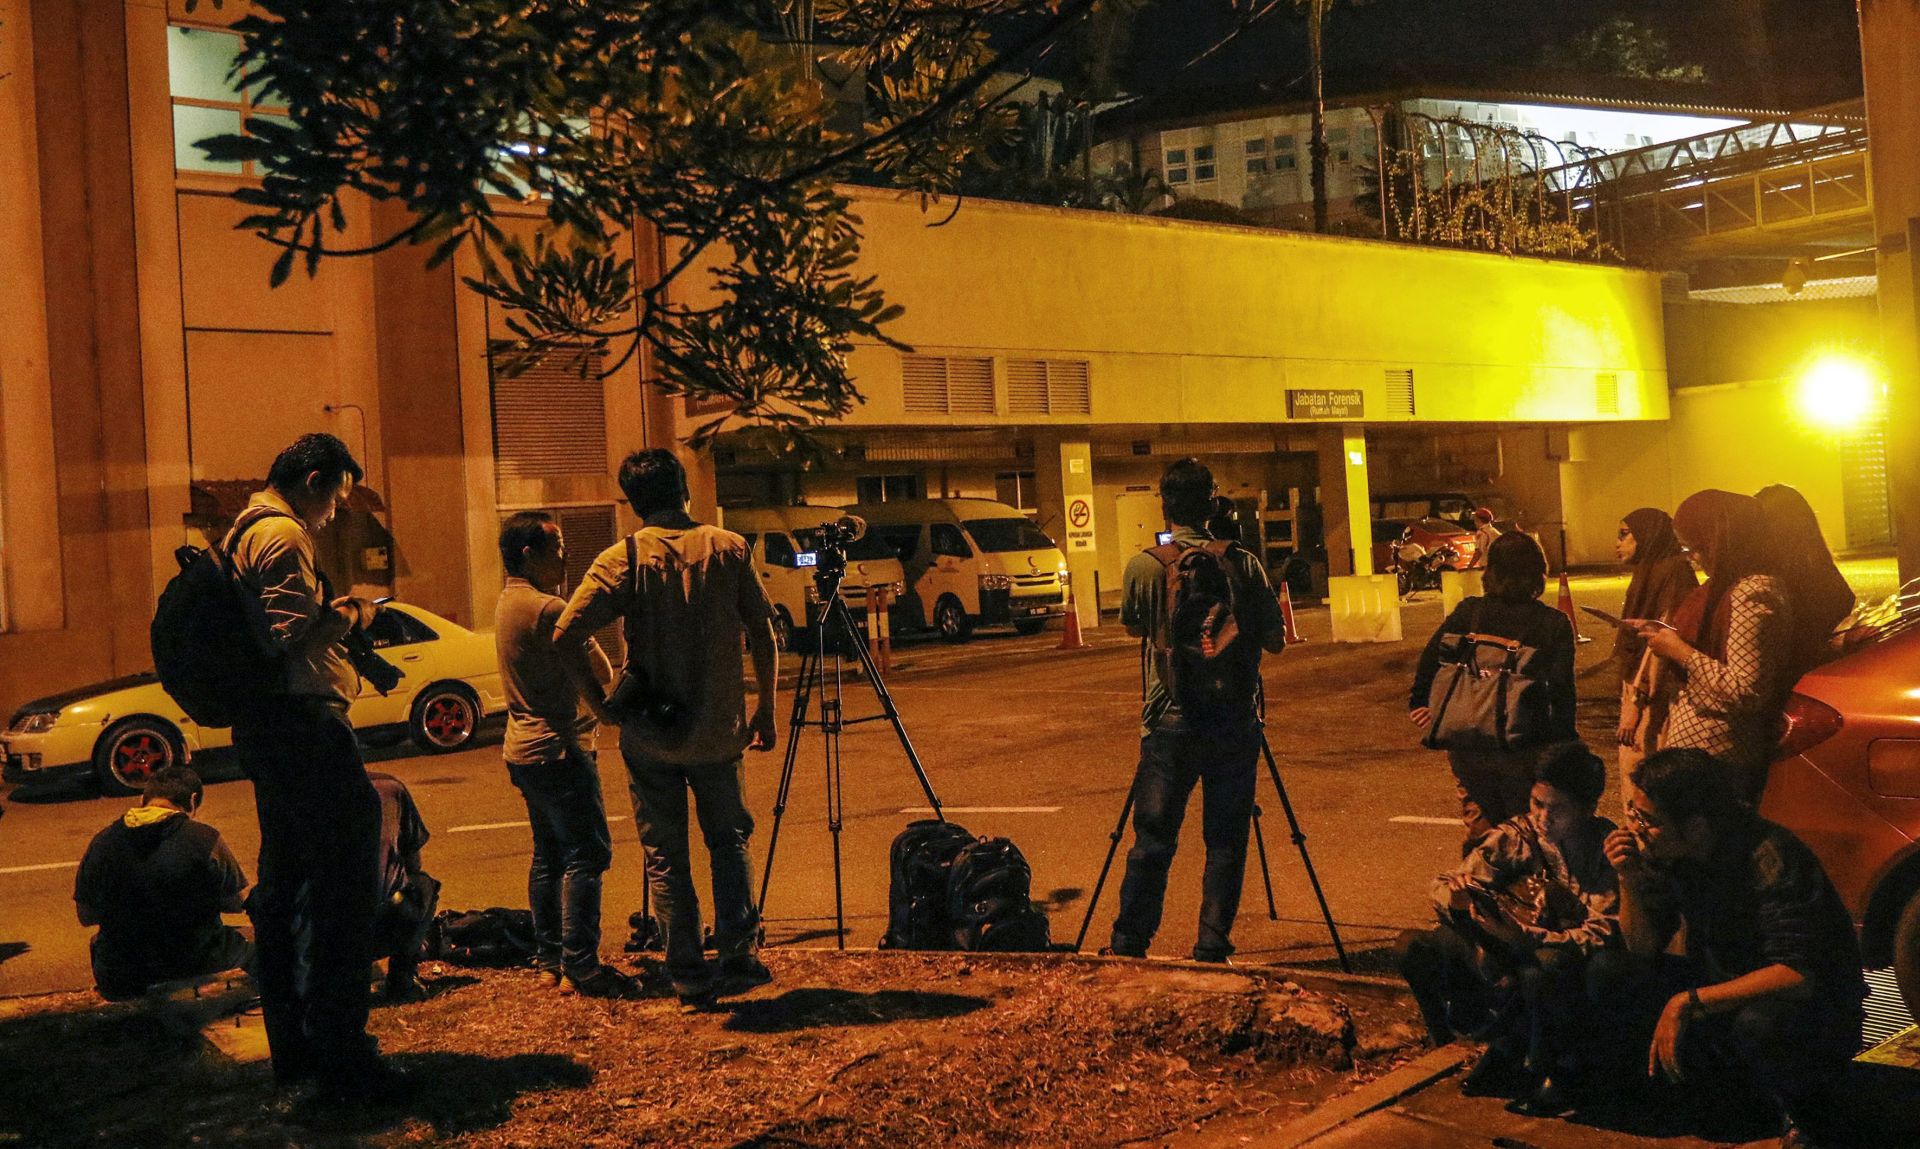 epa05792905 Malaysia media waits outside a mortuary of the Forensic Department of the Putrajaya Hospital, in Putrajaya, Malaysia, 14 February 2017. According to South Korean media reports on 14 February 2017, Kim Jong Nam, the half-brother of North Korean leader Kim Jong-un, has apparently been assassinated by unknown persons at the Kuala Lumpur airport. He reportedly immigrated to China in 1995, and has since then lived there under Chinese protection.  EPA/AHMAD YUSNI